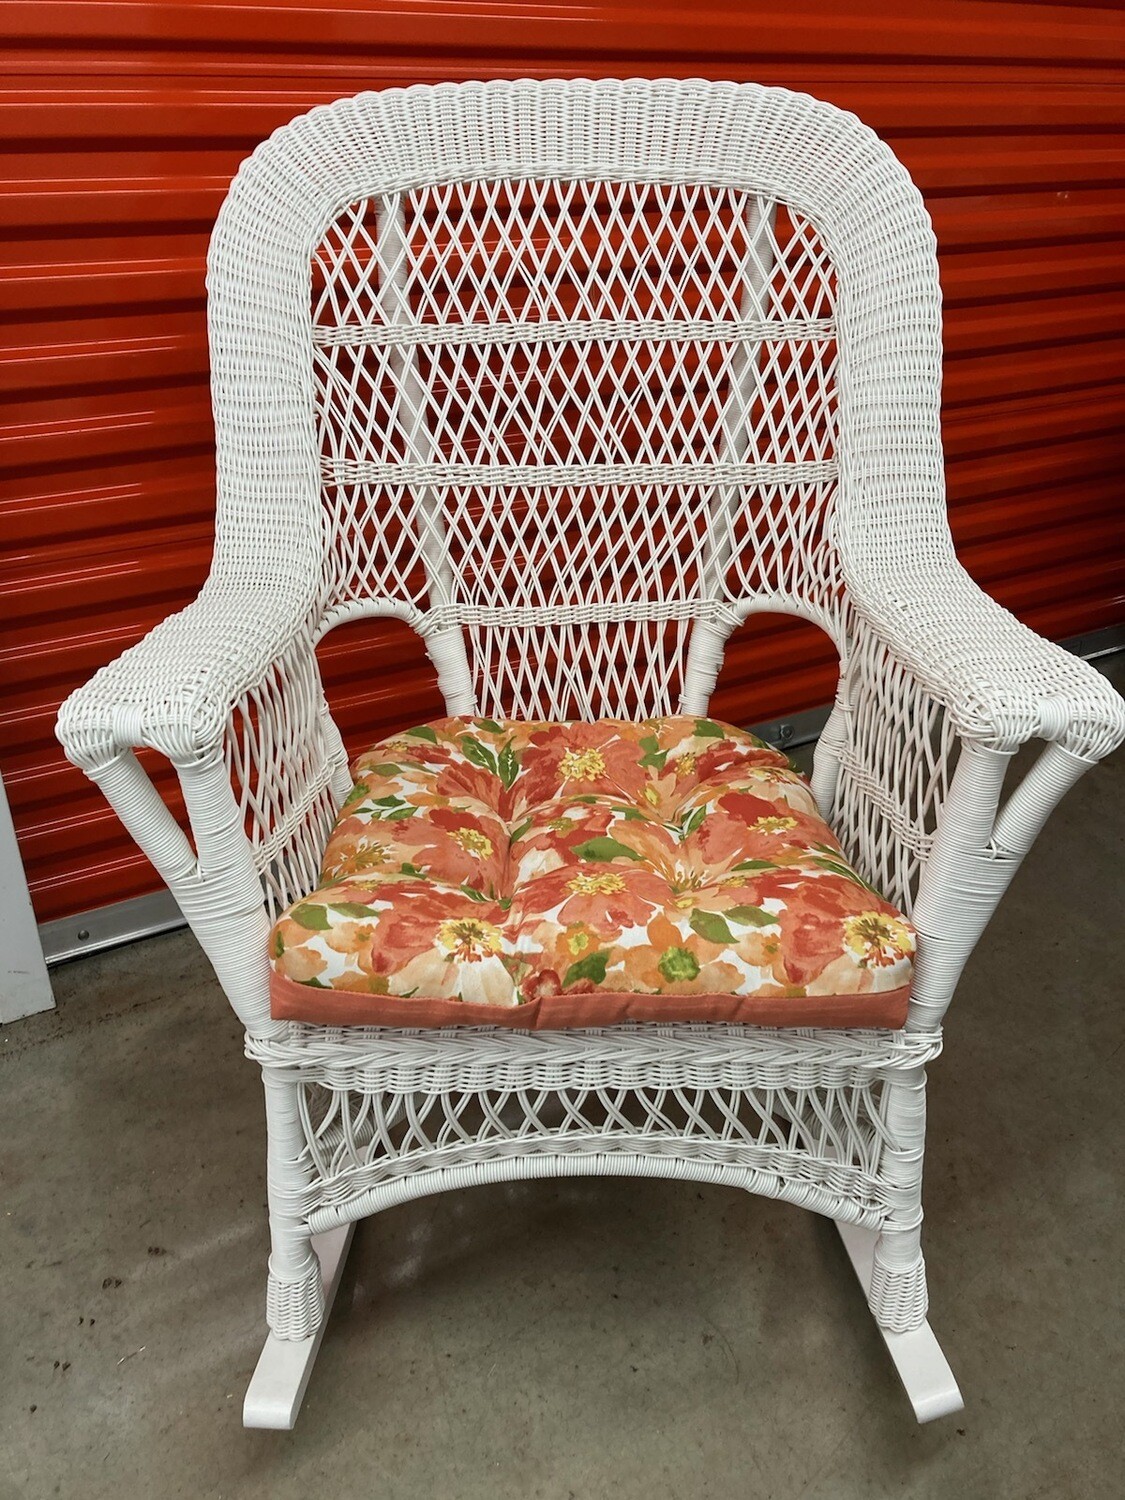 White Wicker Rocking Chair with colorful cushion #2009